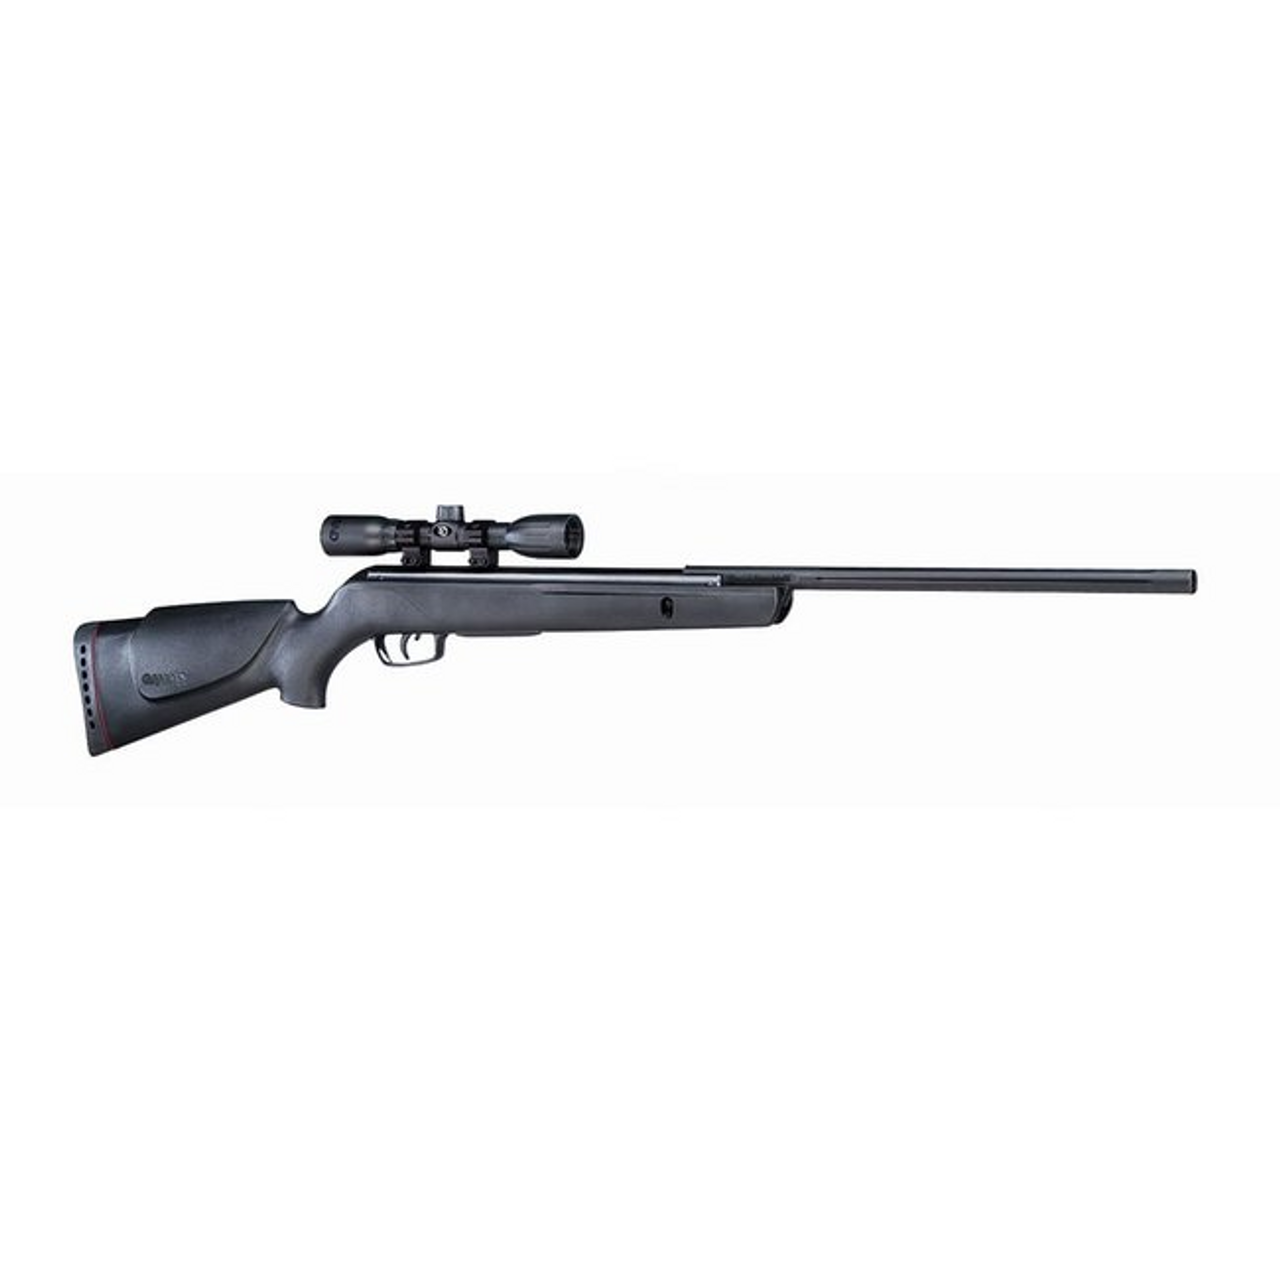 Gamo Outback .177, 495 Fps Air Rifle and Scope